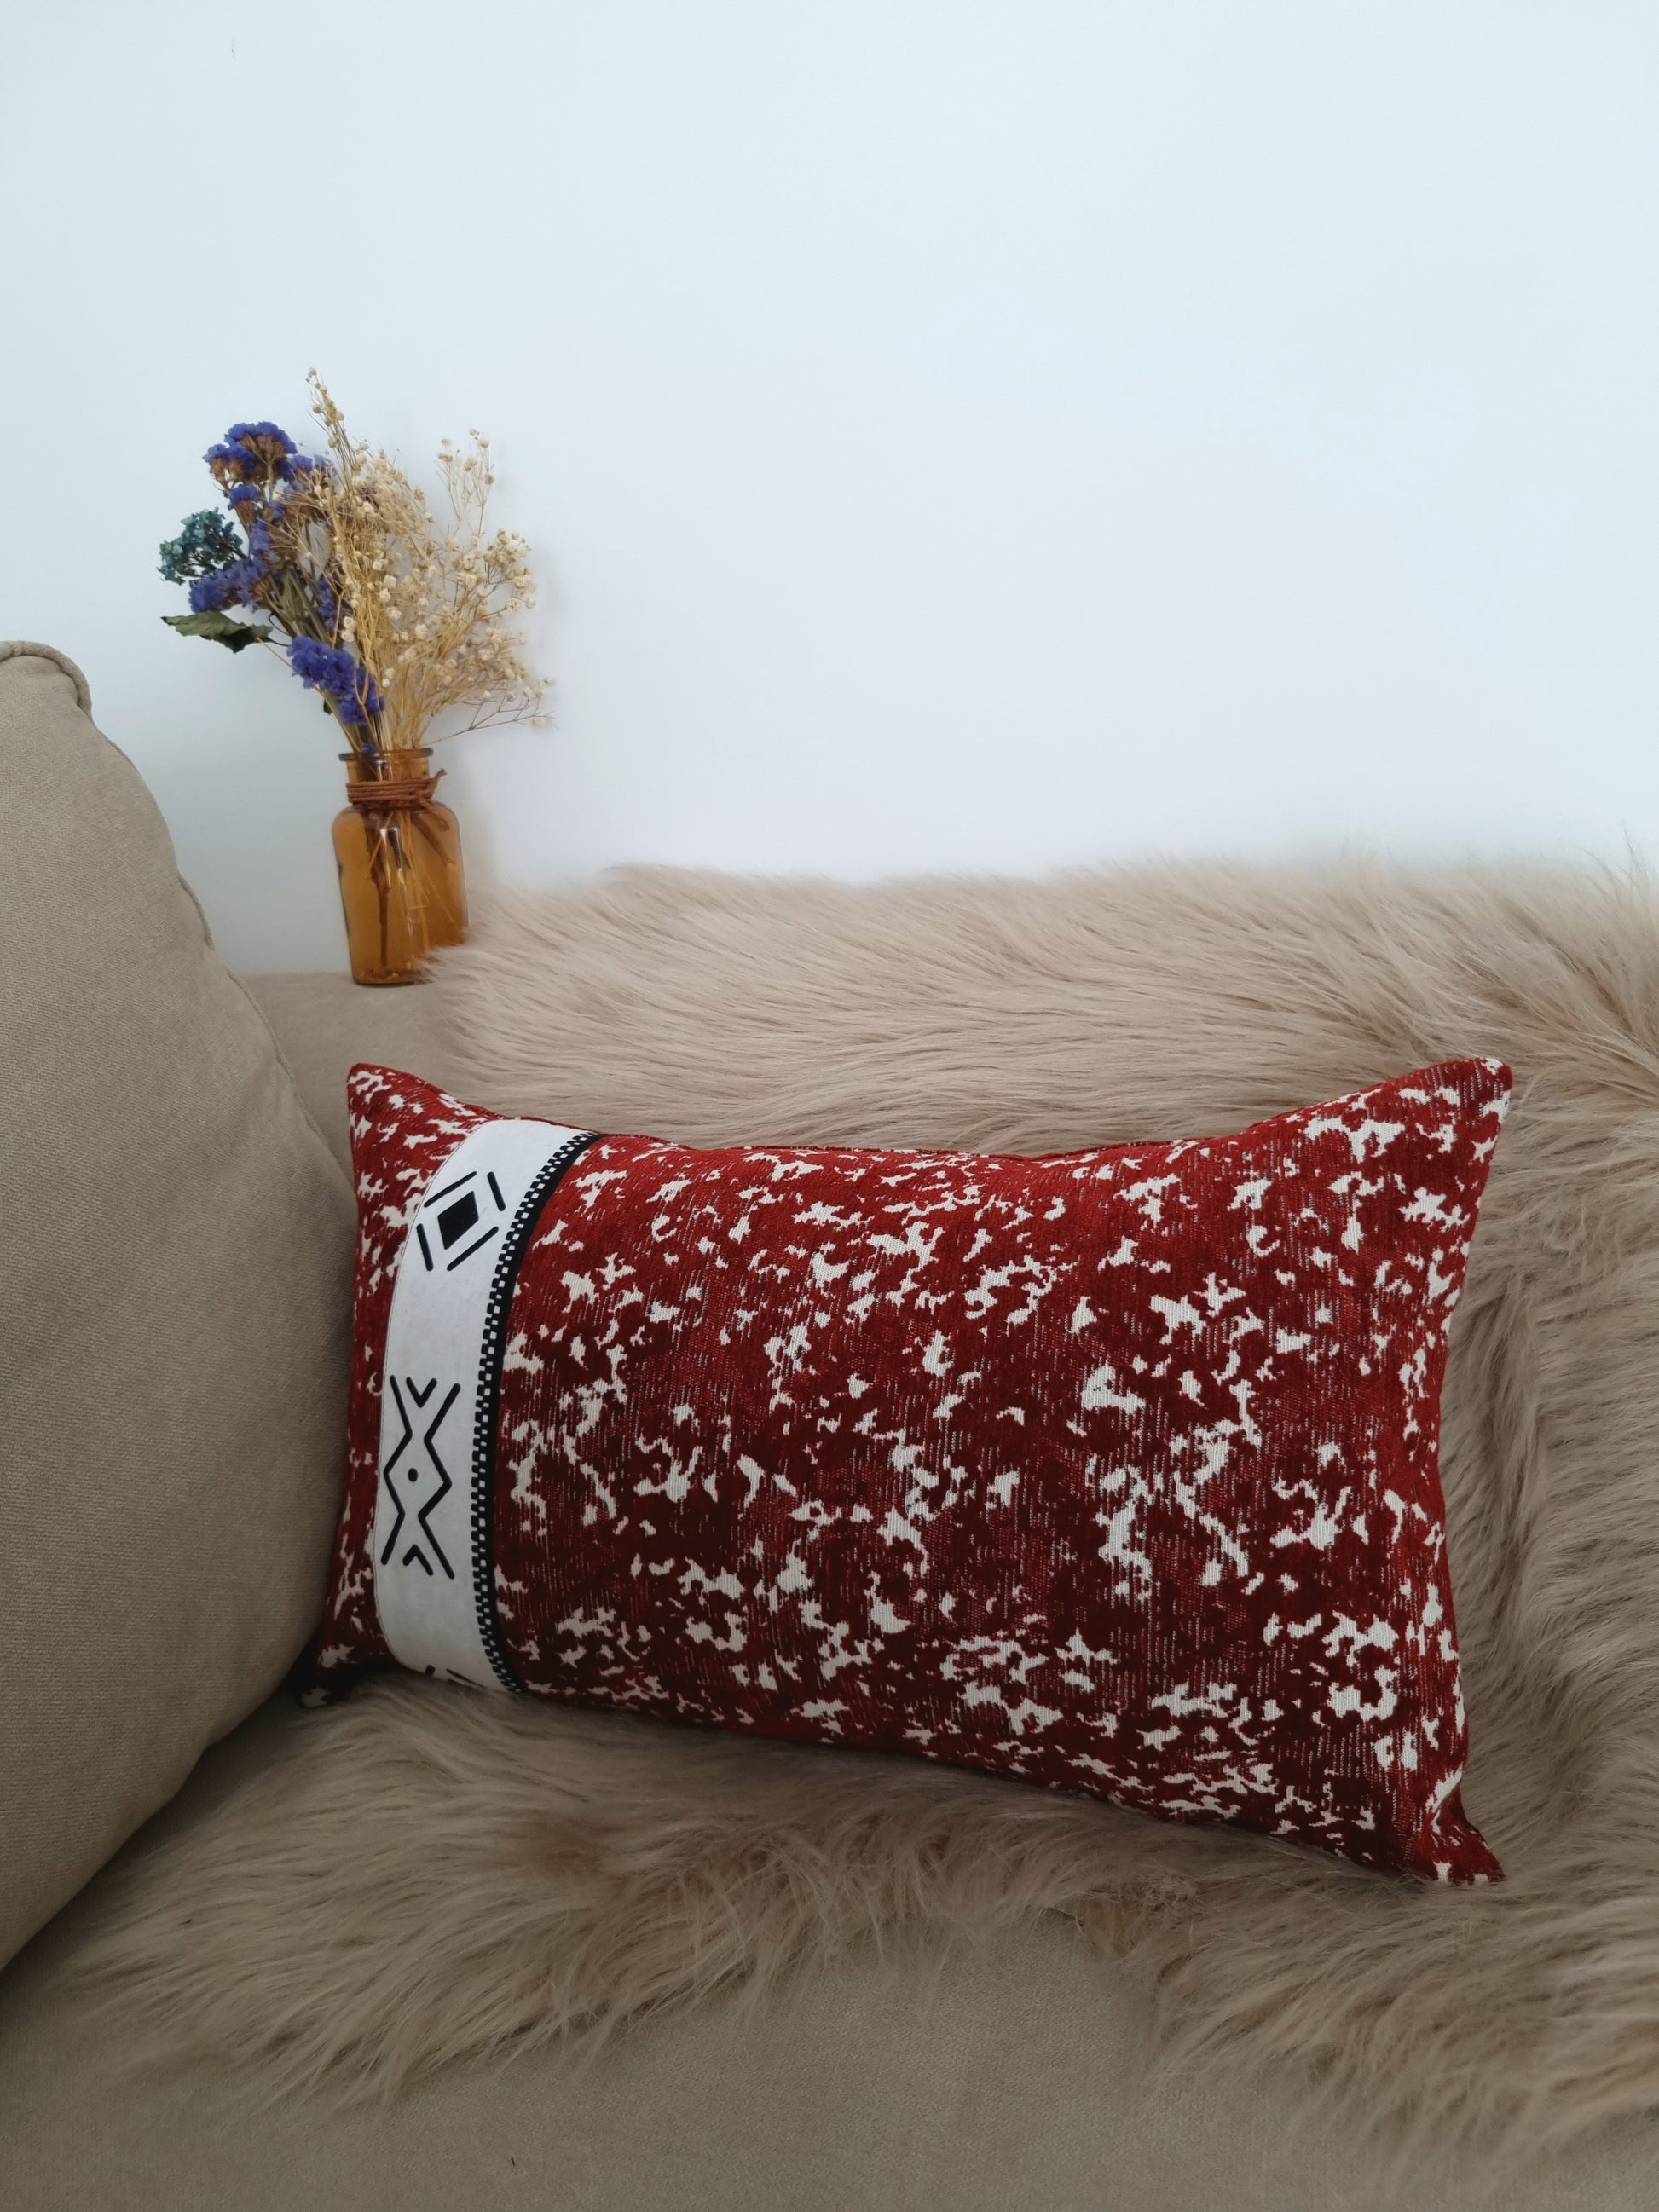 inse-collection-red-cushion-slide-1